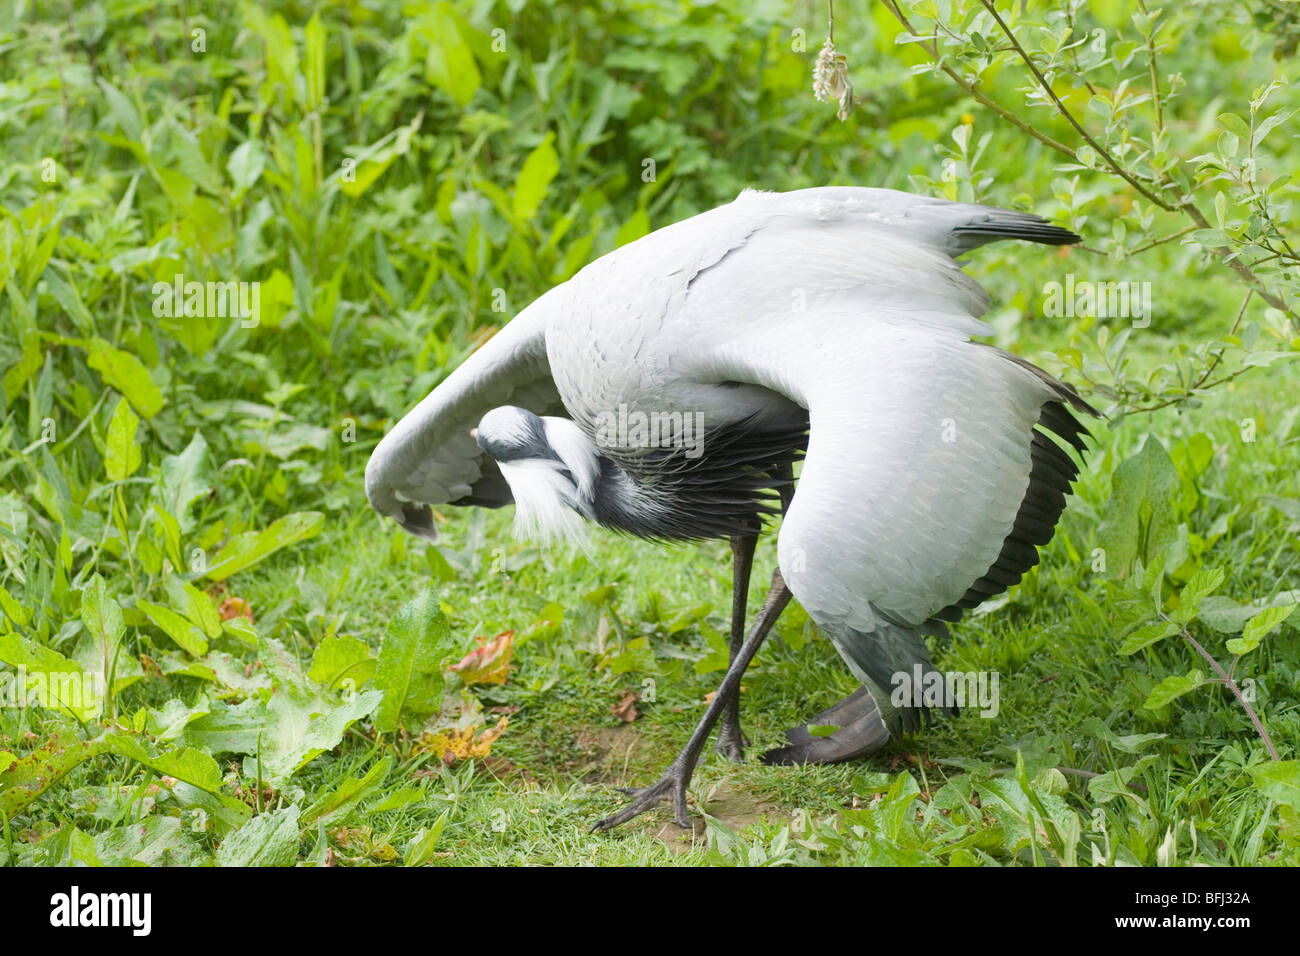 Demoiselle Crane (Anthropoides virgo). 'Broken wing' distraction display. Attempting to lead a perceived predator away from nest Stock Photo